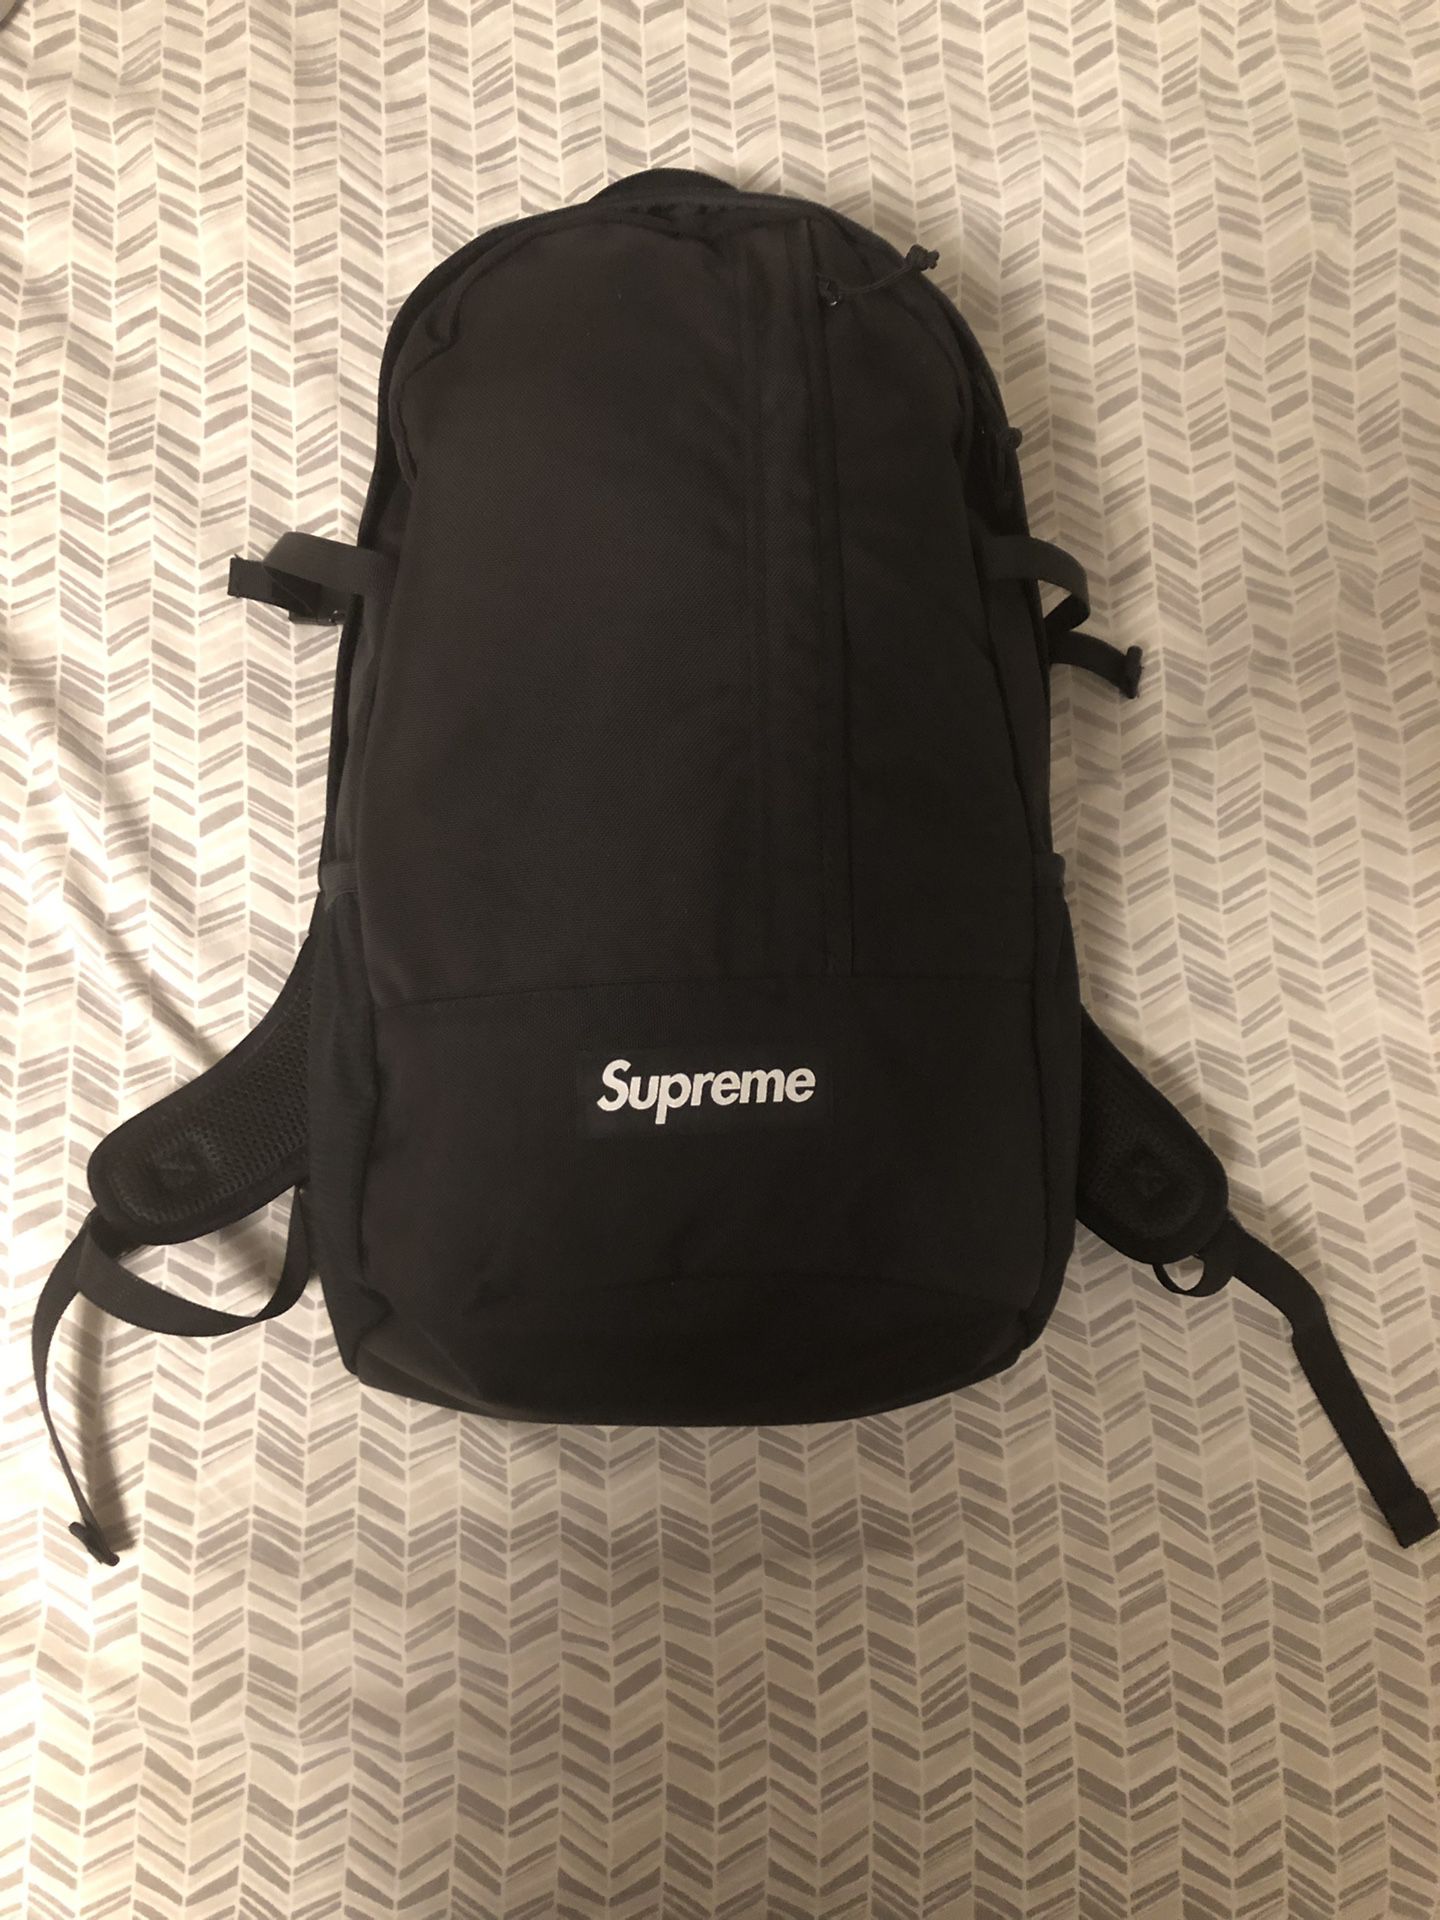 🤪SUPREME SS18 BACKPACK in RED🤪 open to offers. ! - Depop